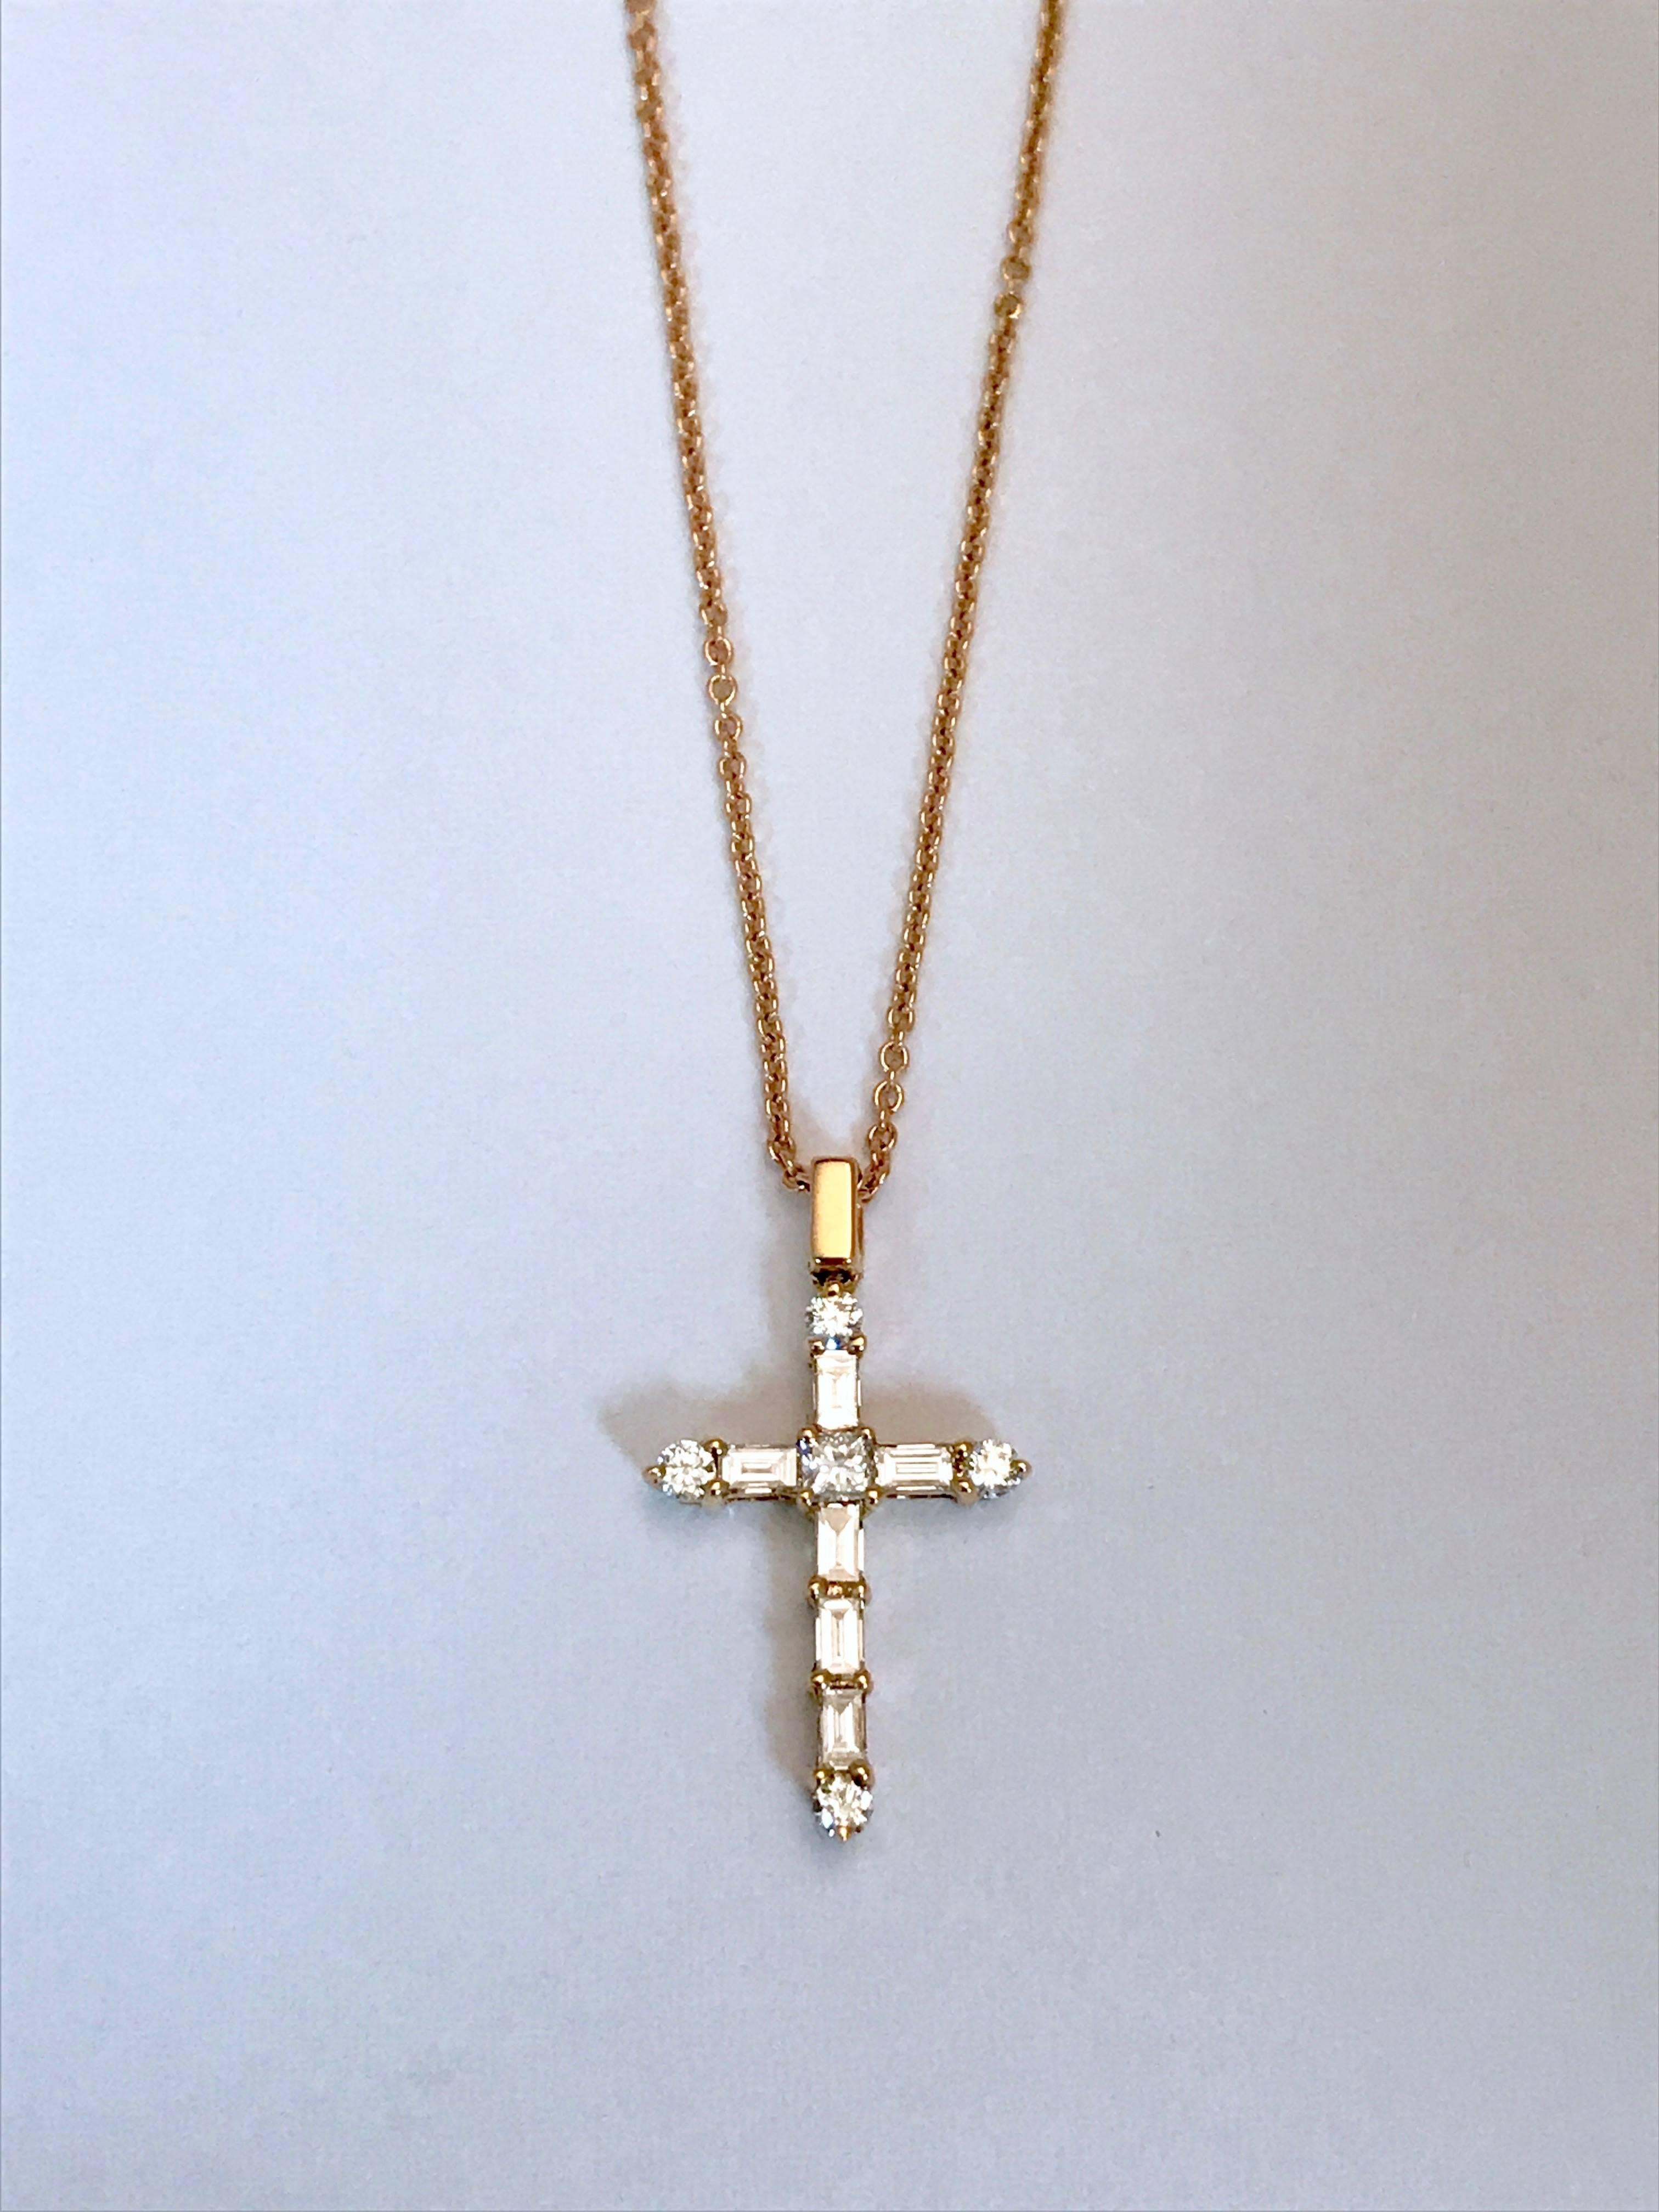 Exceptional Yellow Gold and Diamonds Cross Pendant Necklace.
Yellow Gold 18 Carat
White Diamonds 0,11 Carat
